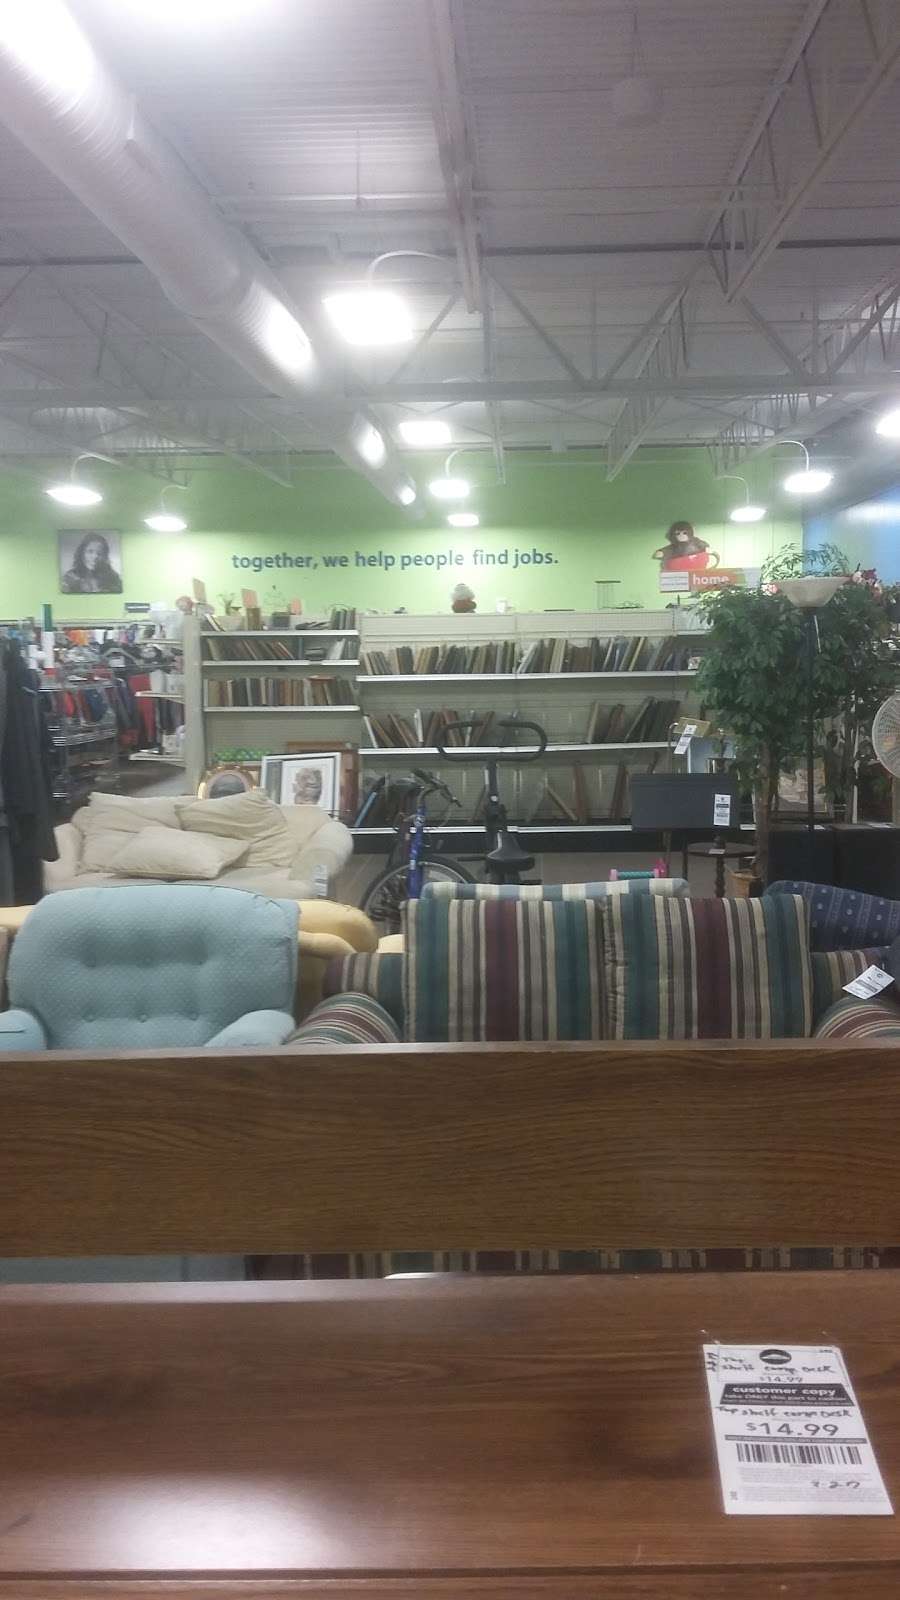 Goodwill Store | 8450 N Michigan Rd, Indianapolis, IN 46268 | Phone: (317) 334-0635